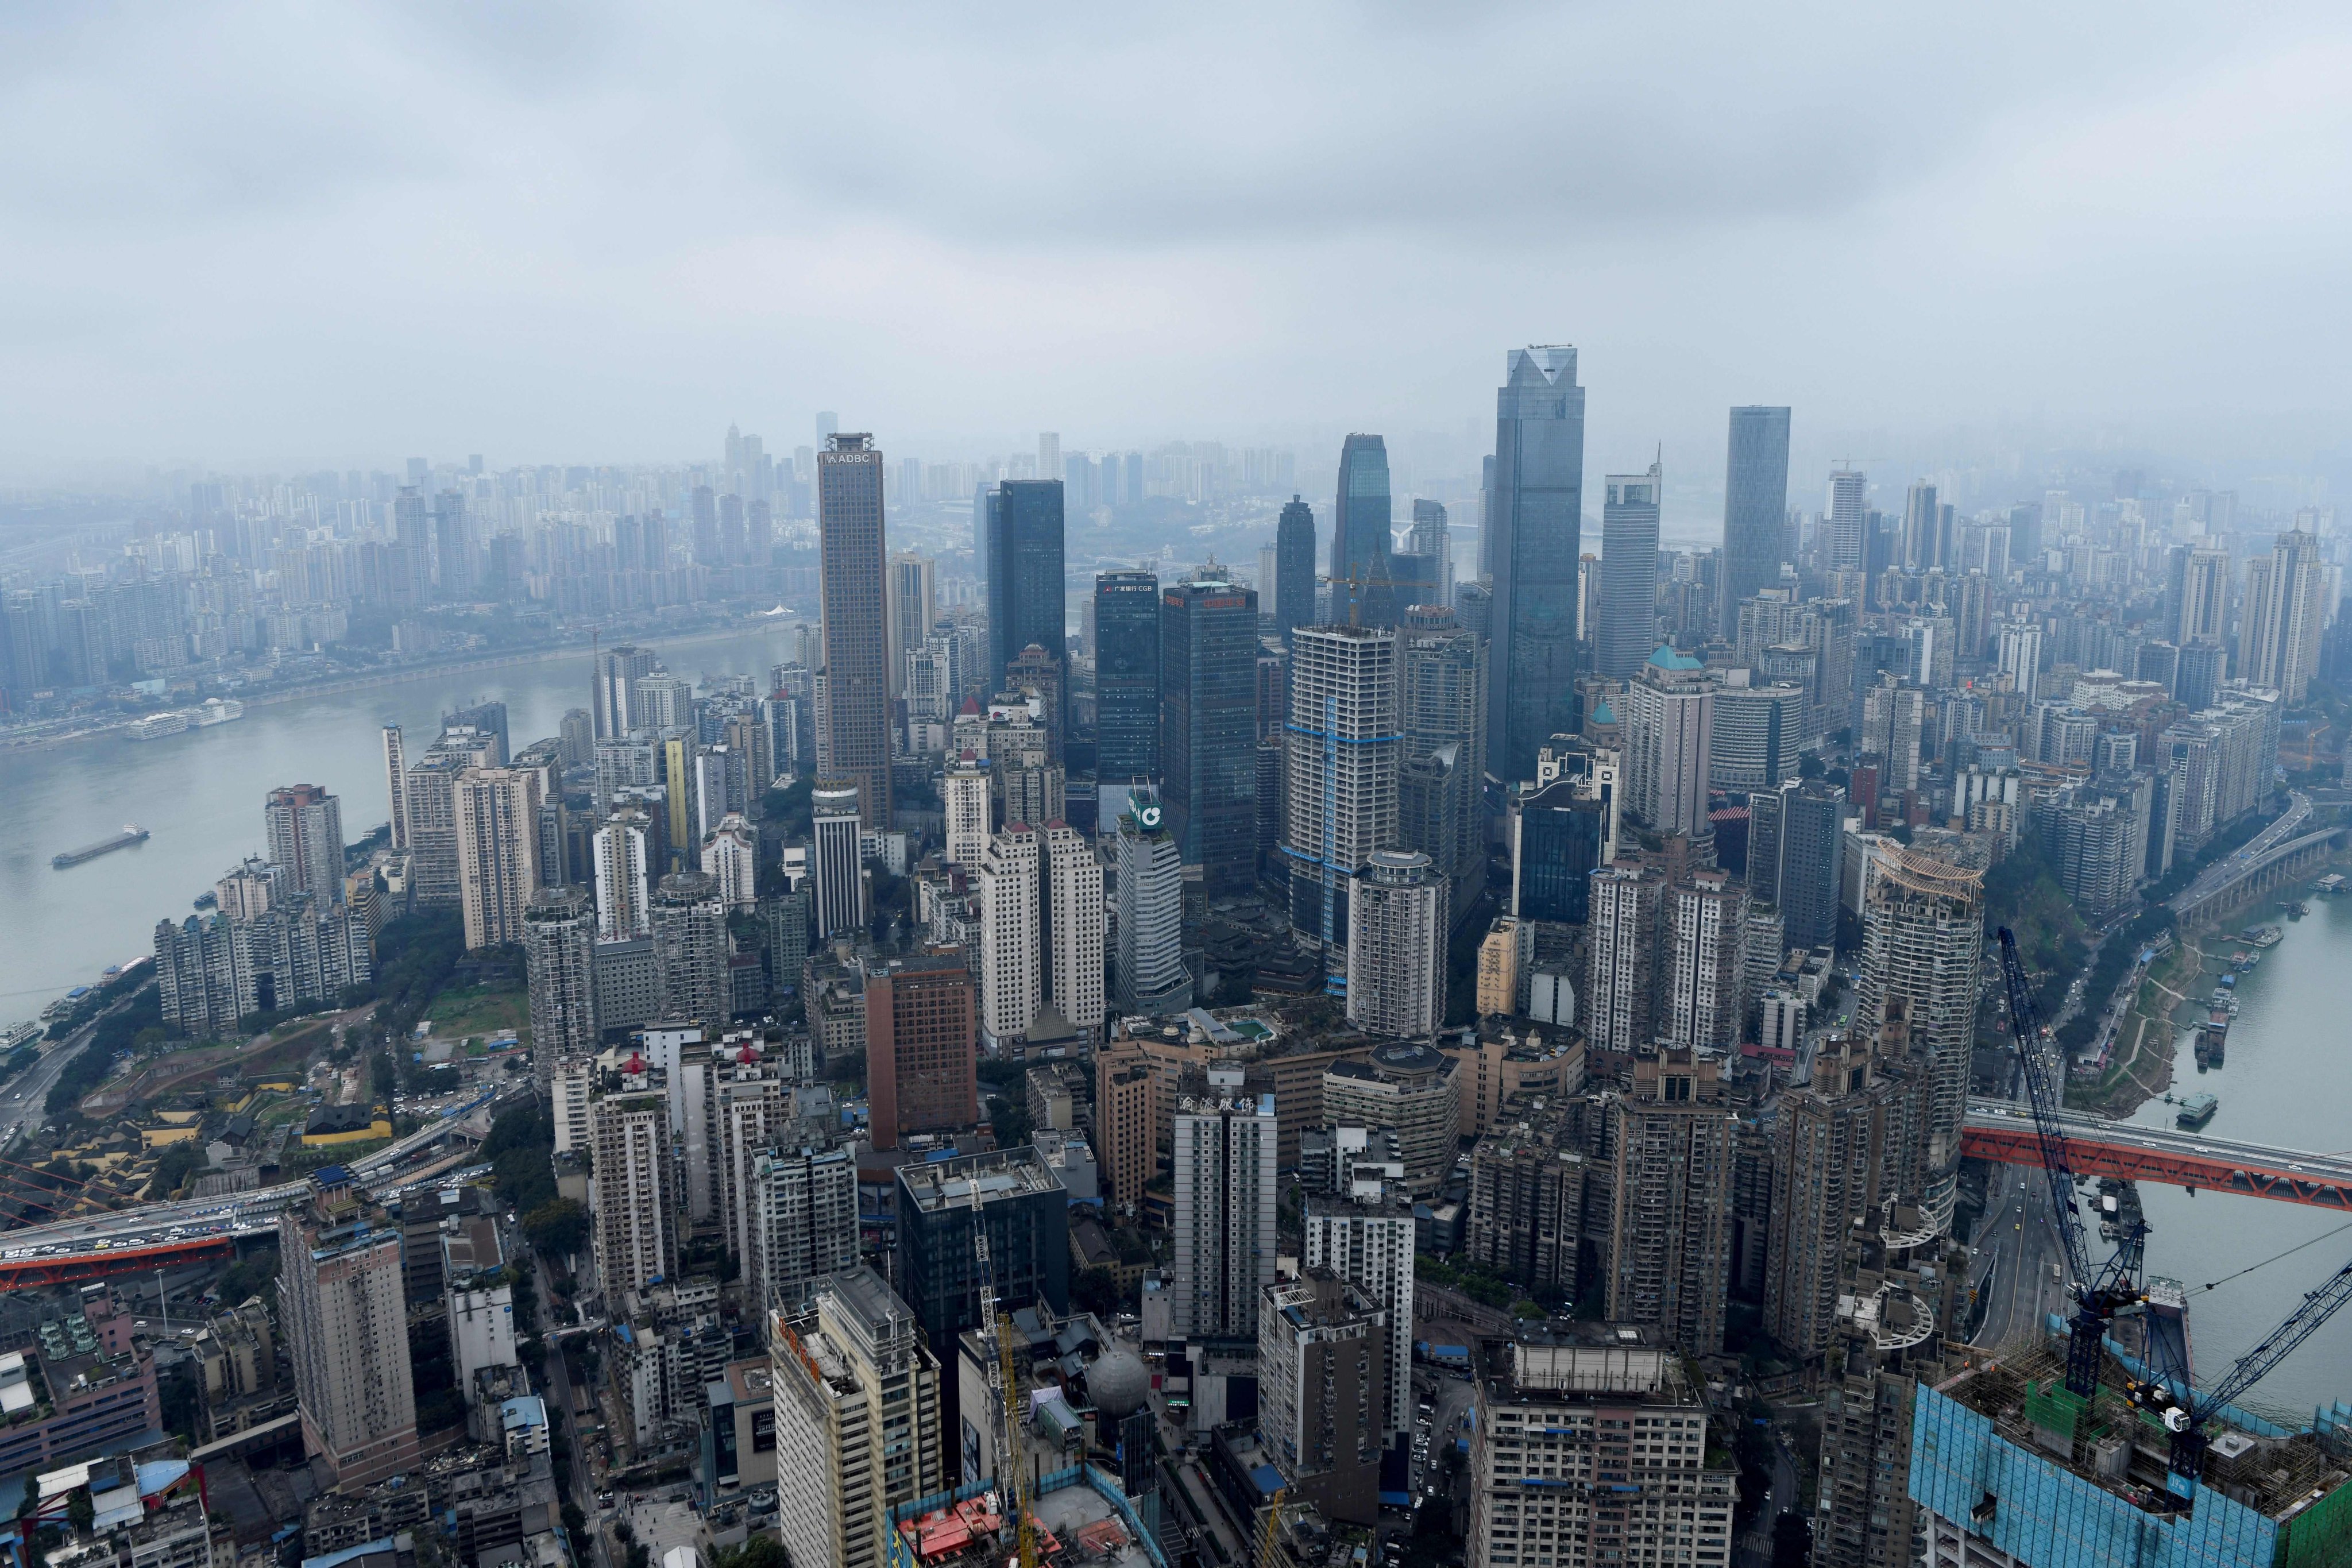 Skyline of Chongqing from the top of Raffles City Chongqing under construction on March 22, 2019. Photo: Getty Images